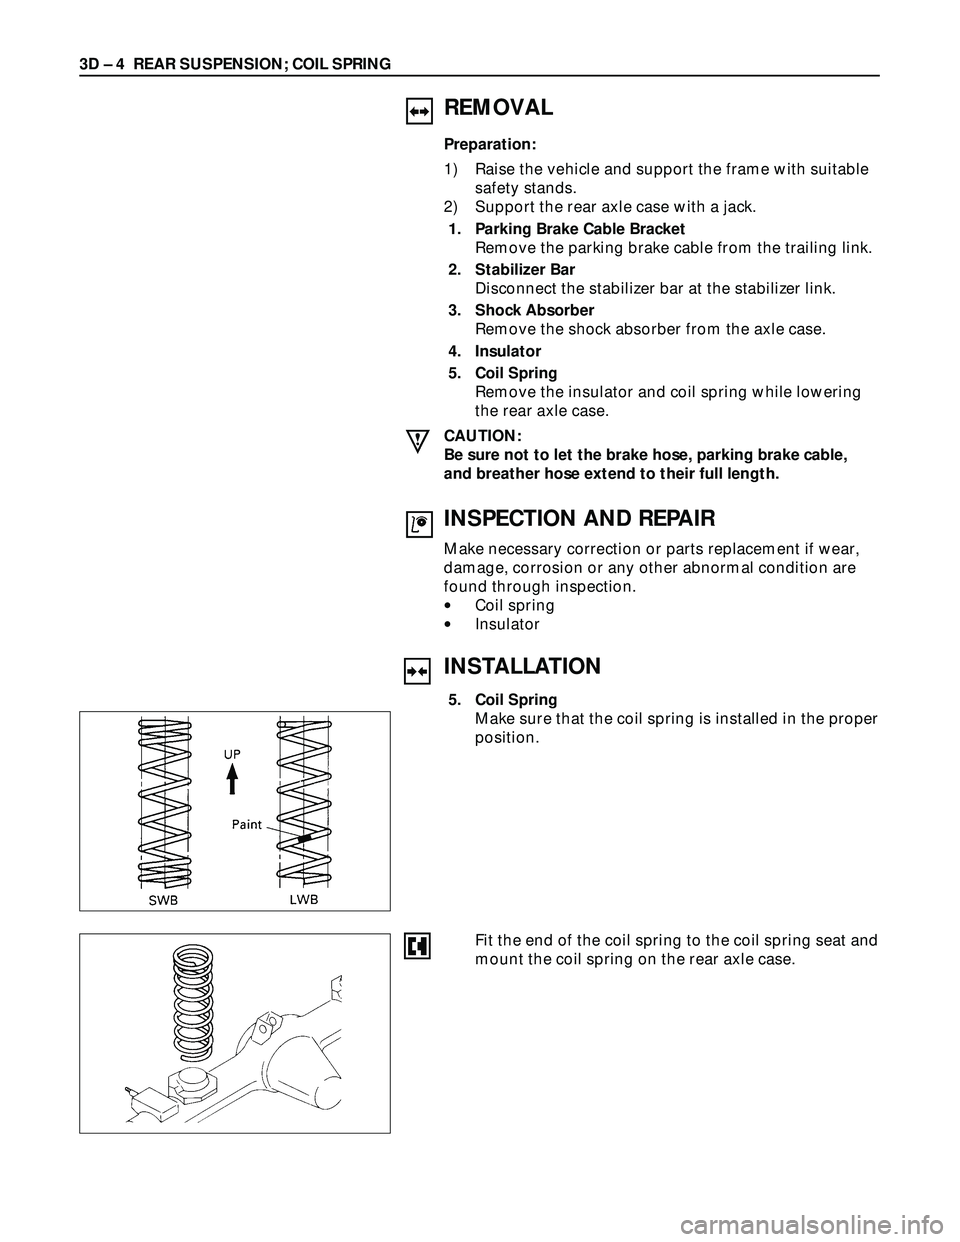 ISUZU TROOPER 1998  Service User Guide 3D – 4 REAR SUSPENSION; COIL SPRING
INSTALLATION
5. Coil Spring
Make sure that the coil spring is installed in the proper
position.
REMOVAL
Preparation:
1) Raise the vehicle and support the frame wi